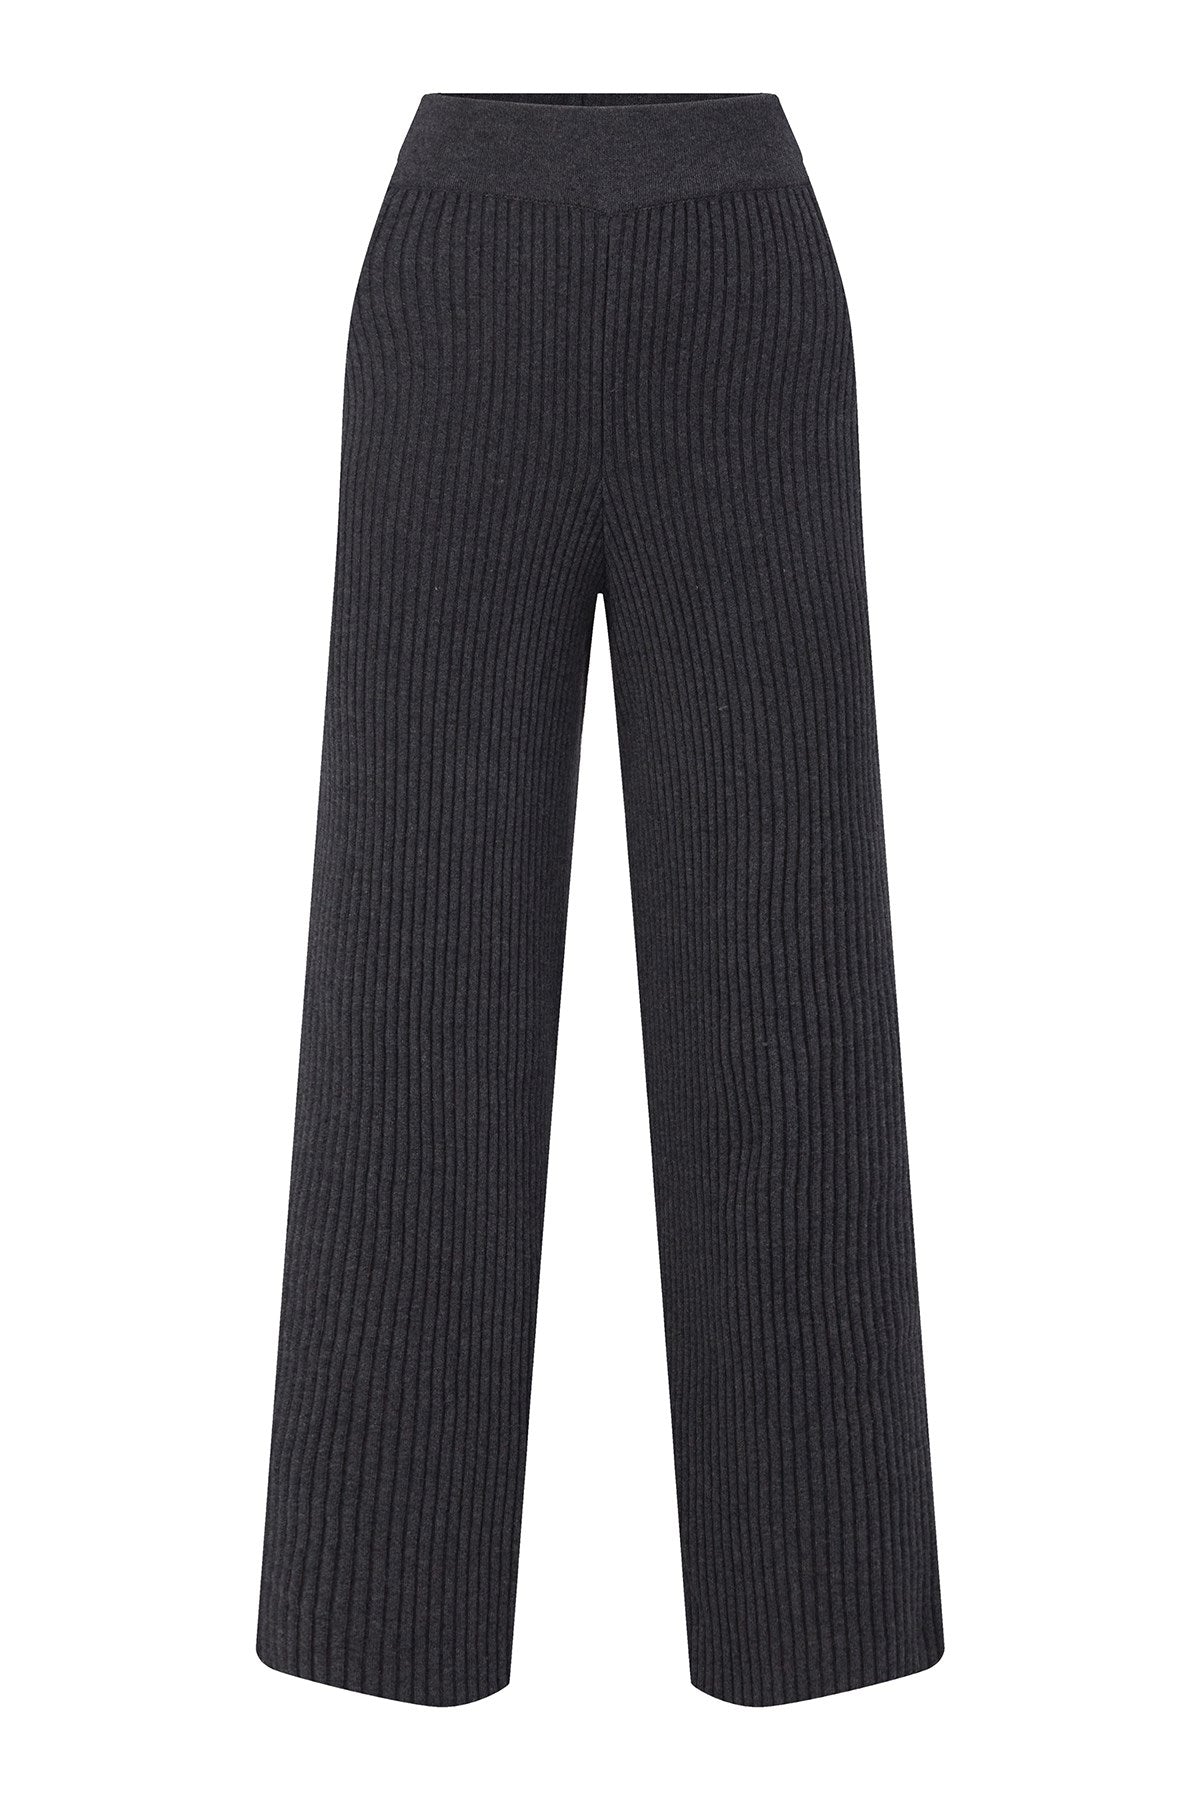 Women’s Grey Cashmere Blend Straight-Cut Knit Trousers - Anthracite Small Peraluna